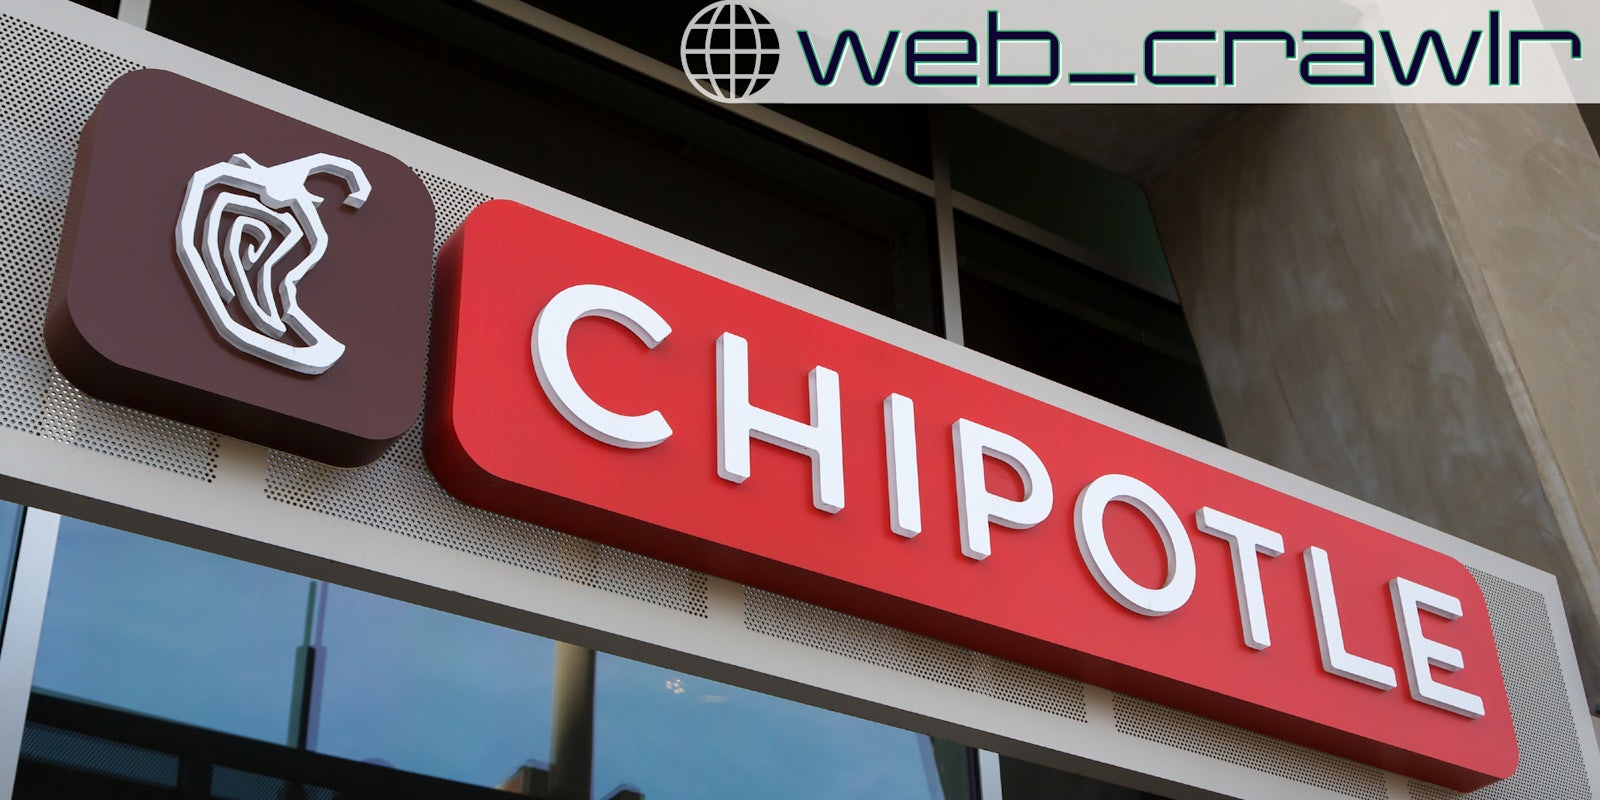 A Chipotle sign. The Daily Dot newsletter web_crawlr logo is in the top right corner.